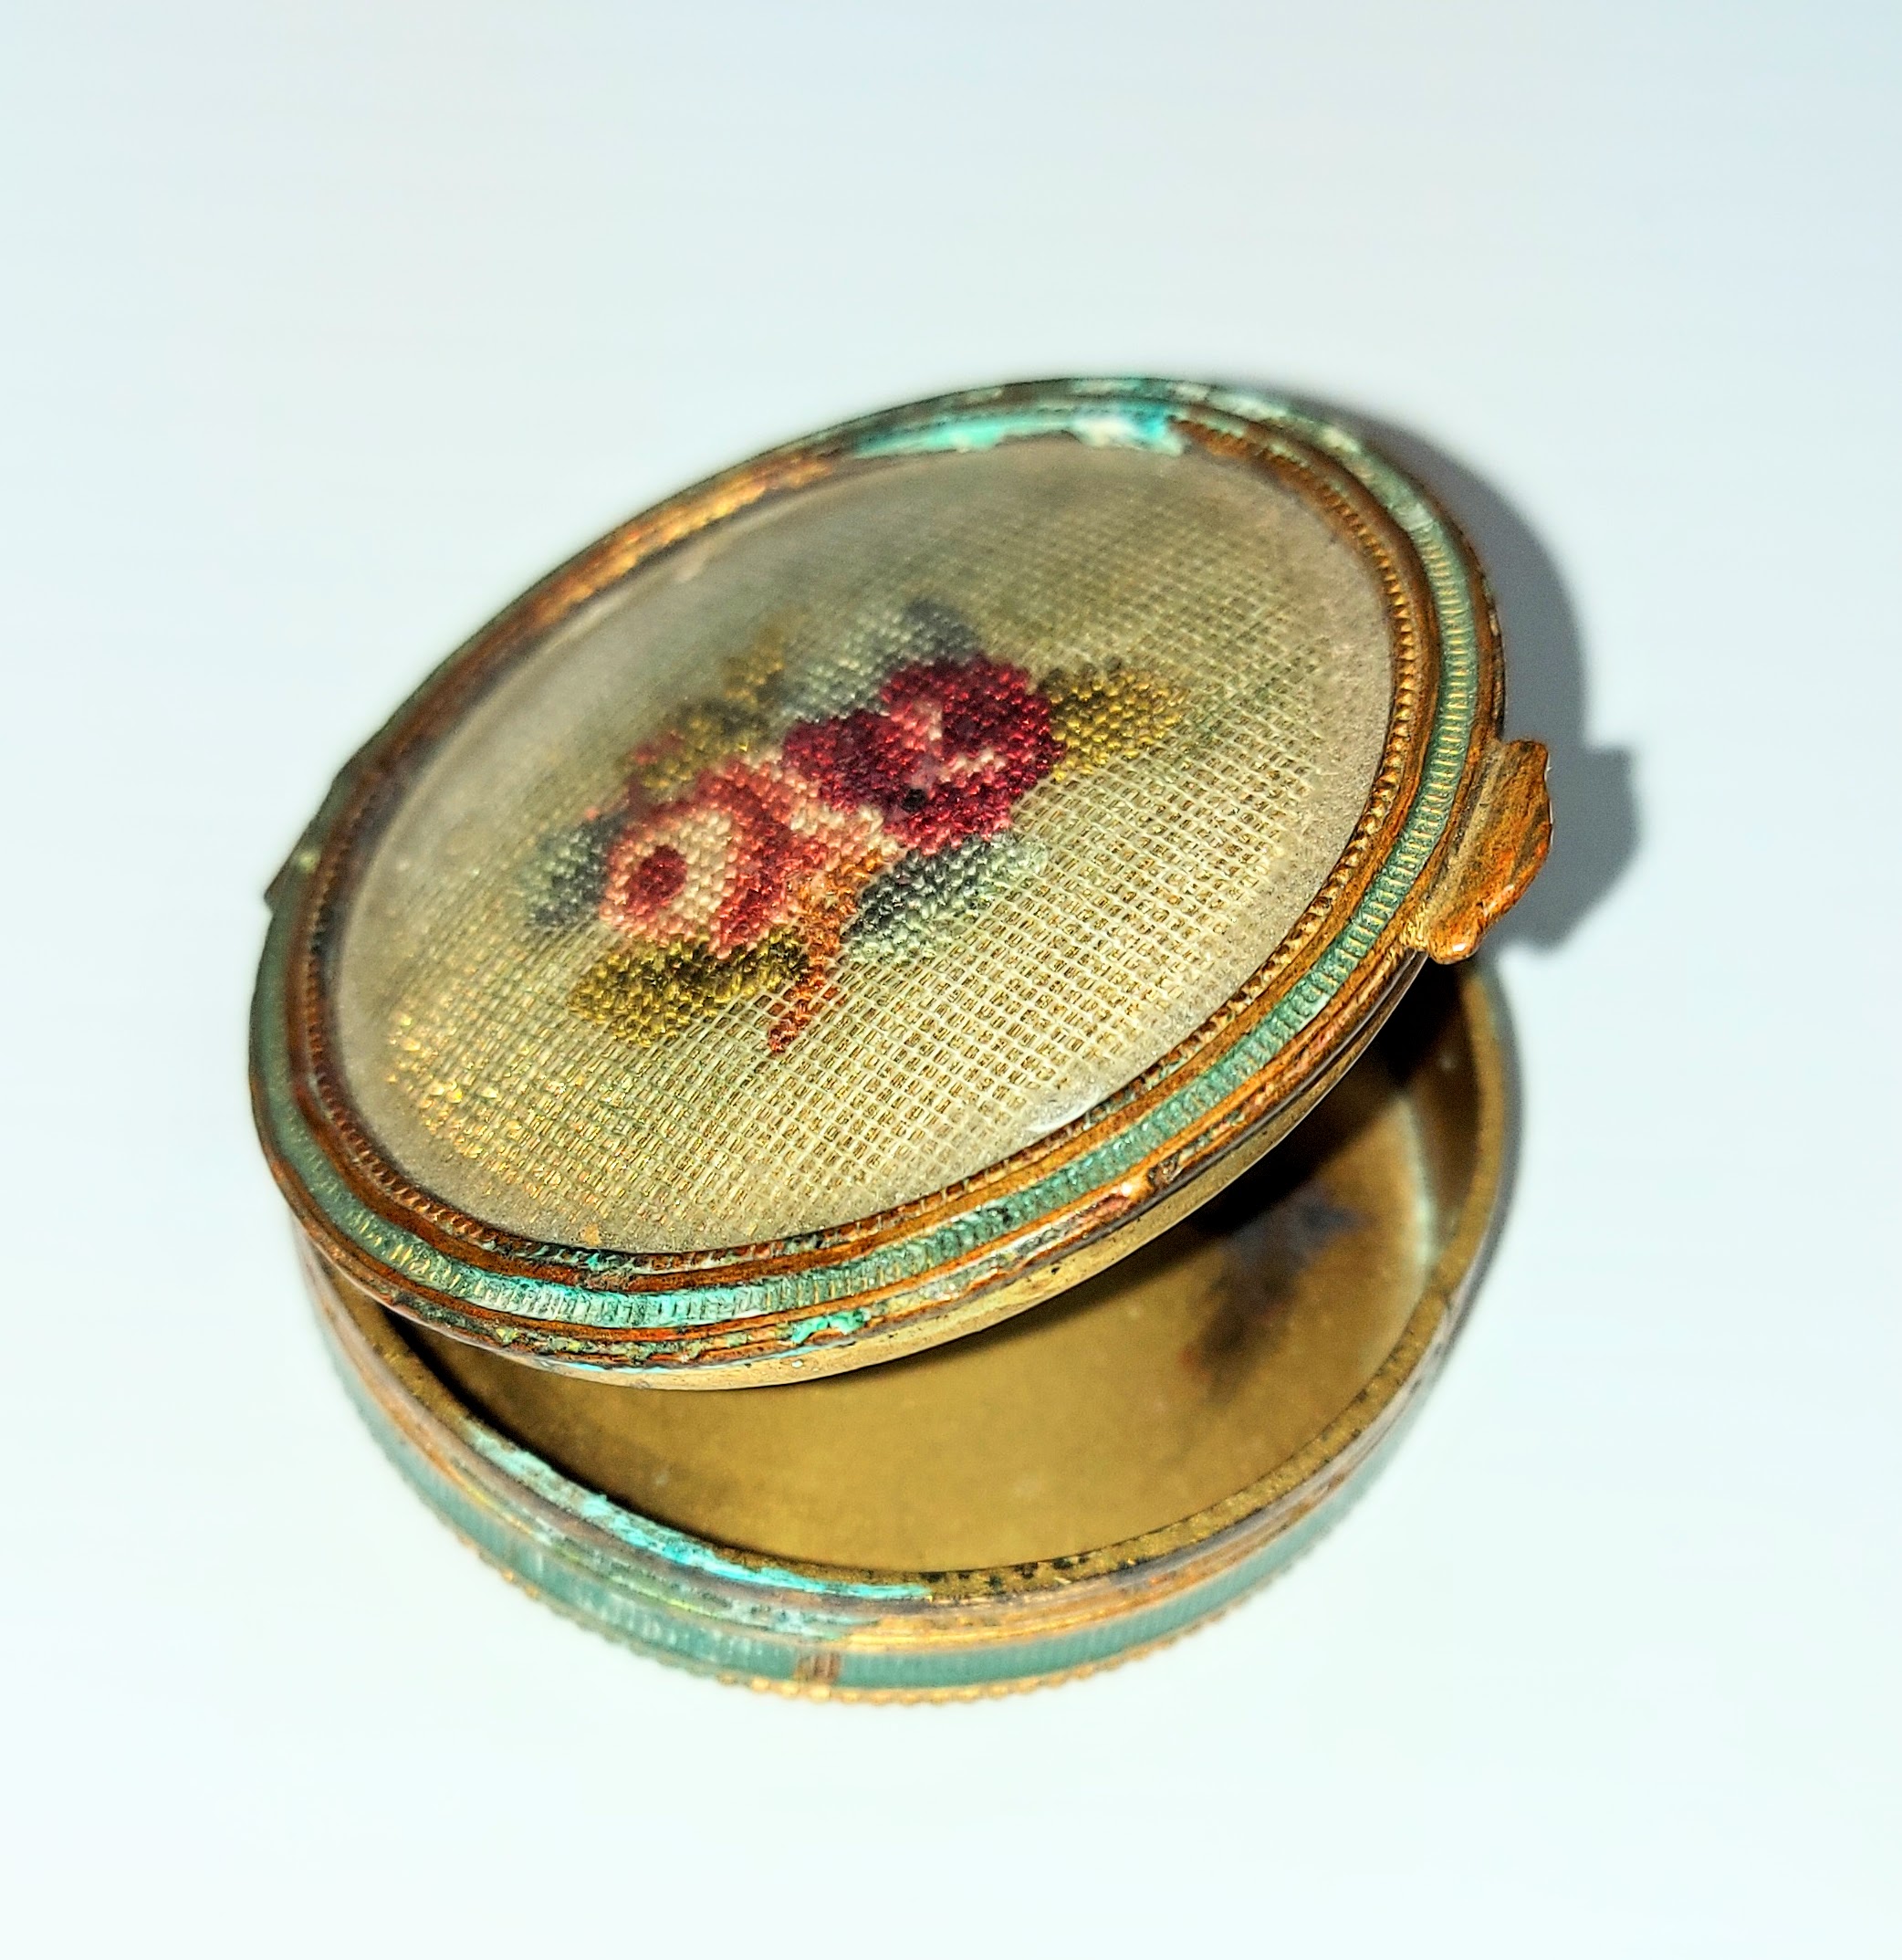 This small case is a makeup compact. On the interior of the lid is a small mirror and though it is mostly empty there are still trace amounts of powder in the base. The floral pattern on the top is intricate needlepoint work - safely held behind a piece of glass. The turquoise color comes from a tarnish on the brass metal of the compact. There is no brand or date labelled on the object but likely dates back to the 40's.
2003.34.02 / Bundy, Val
13/03/2023